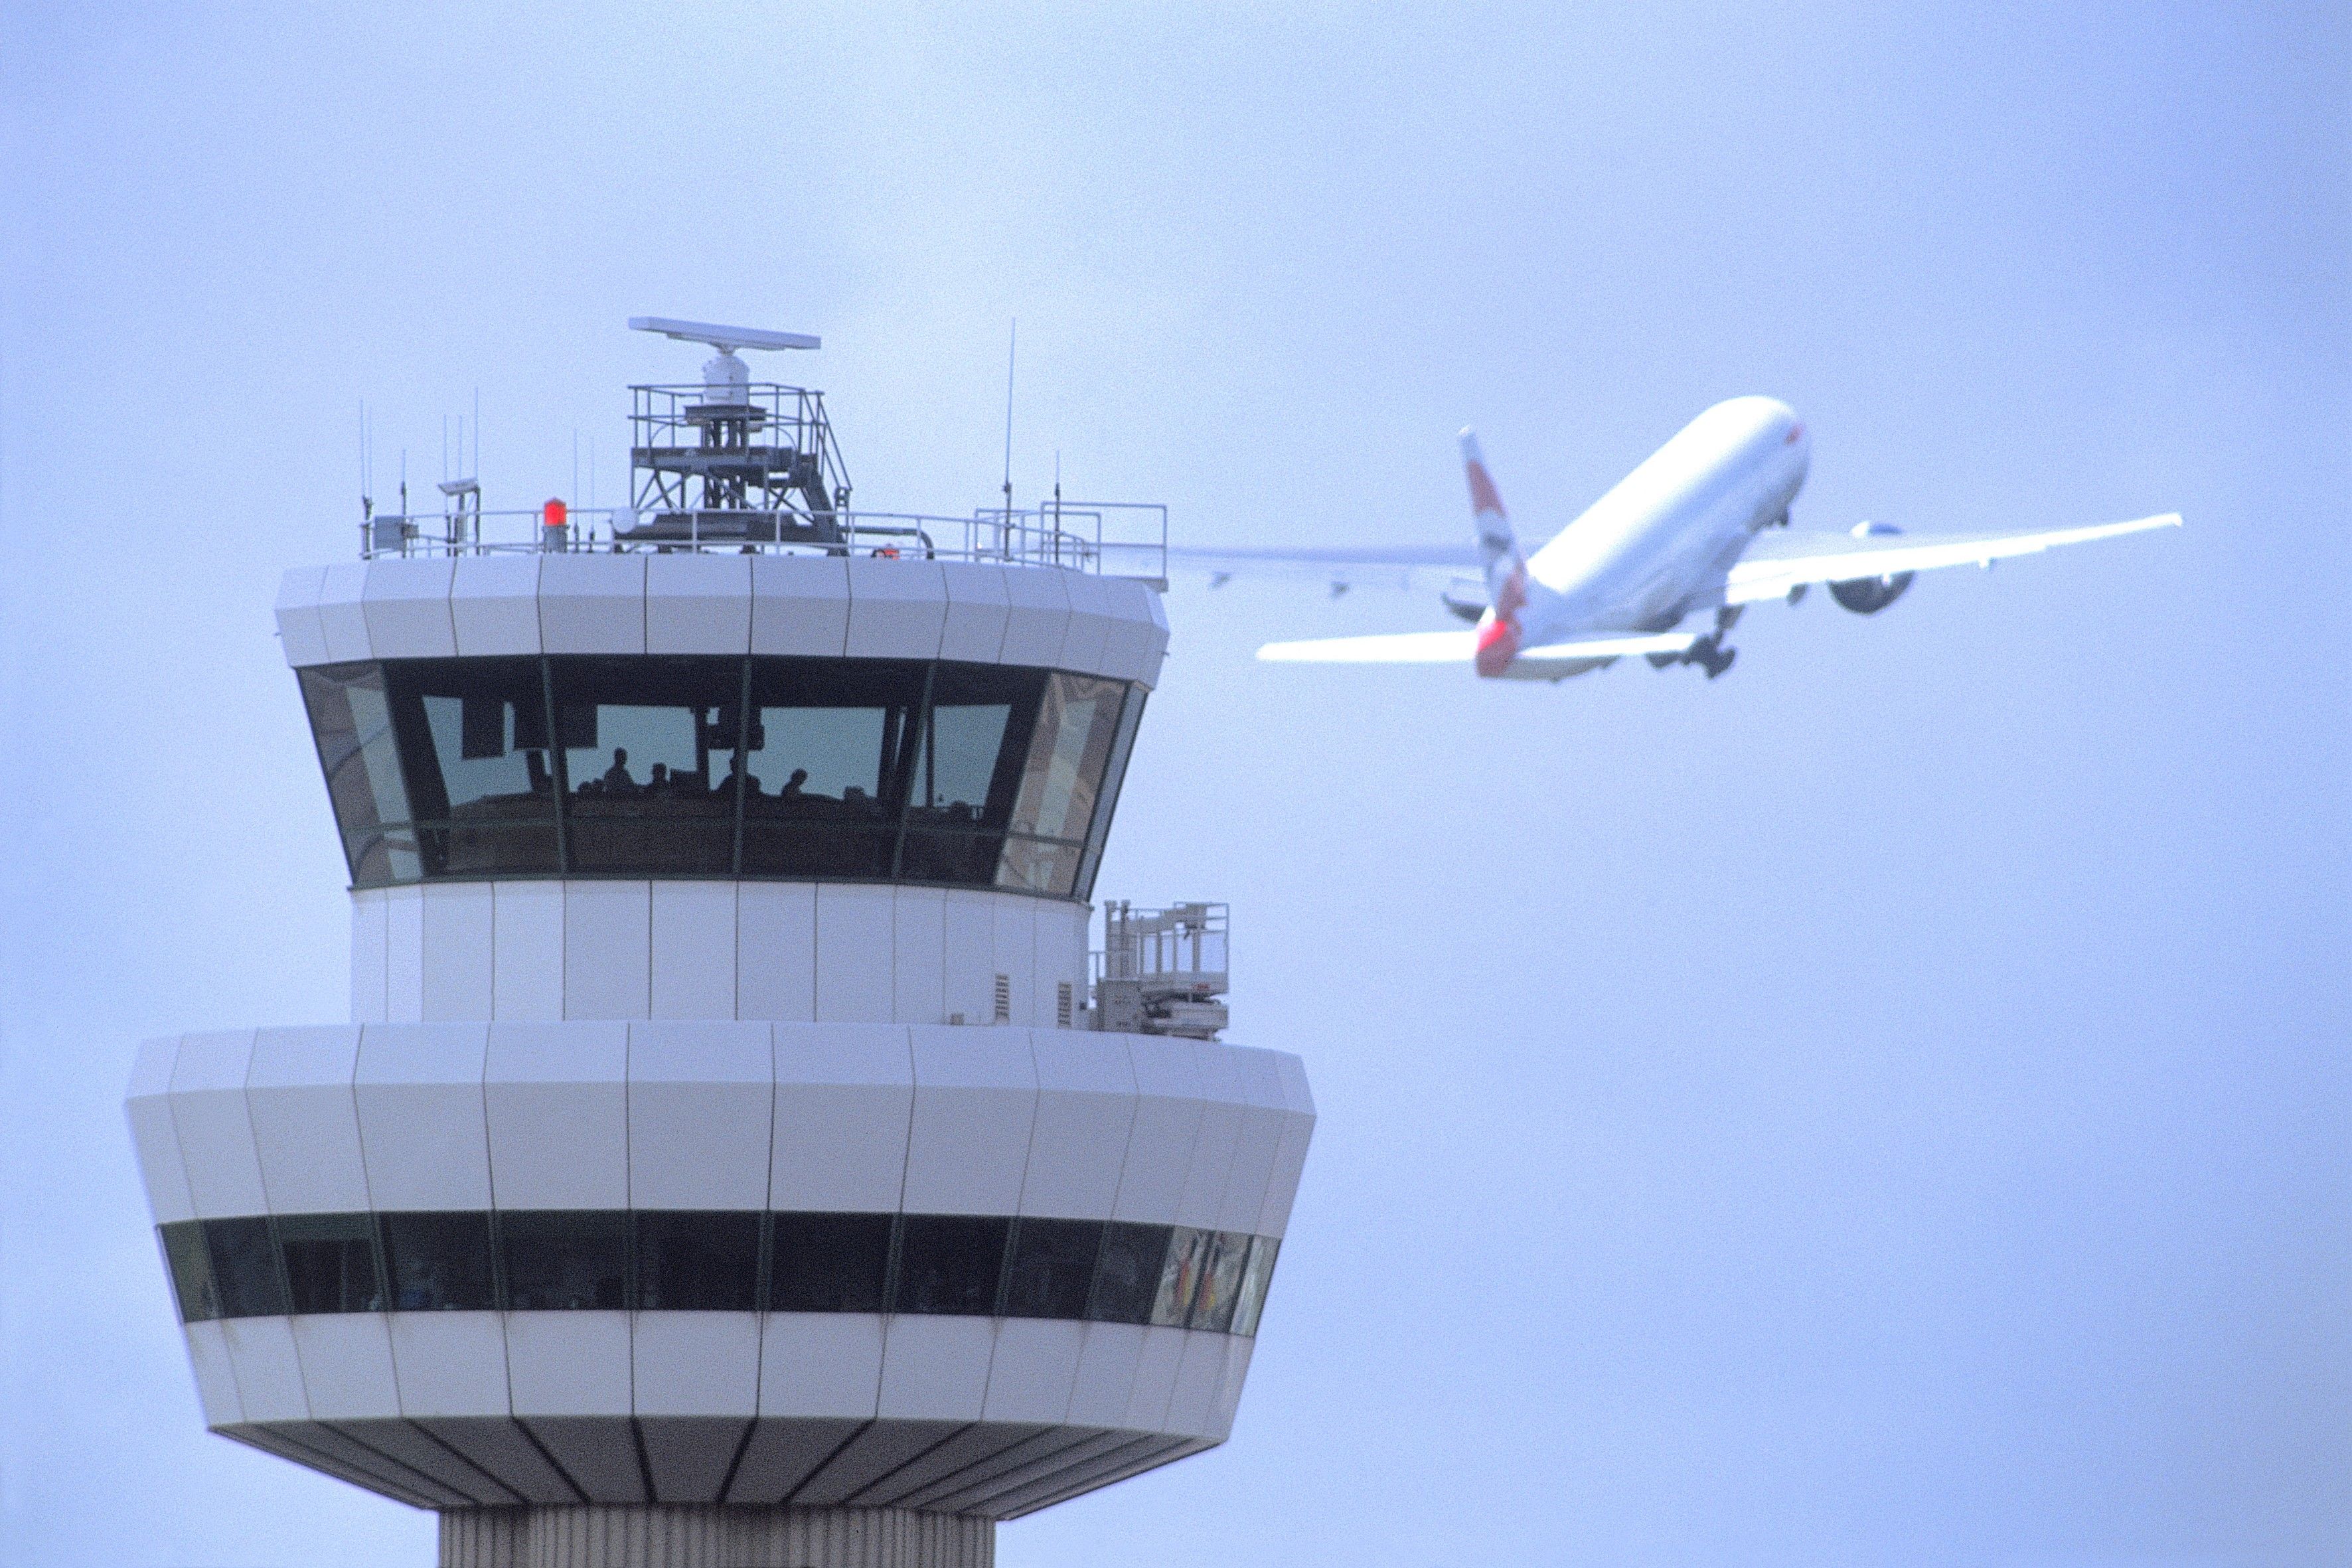 London Gatwick Airport ATC Tower With Plane Departing In The Background